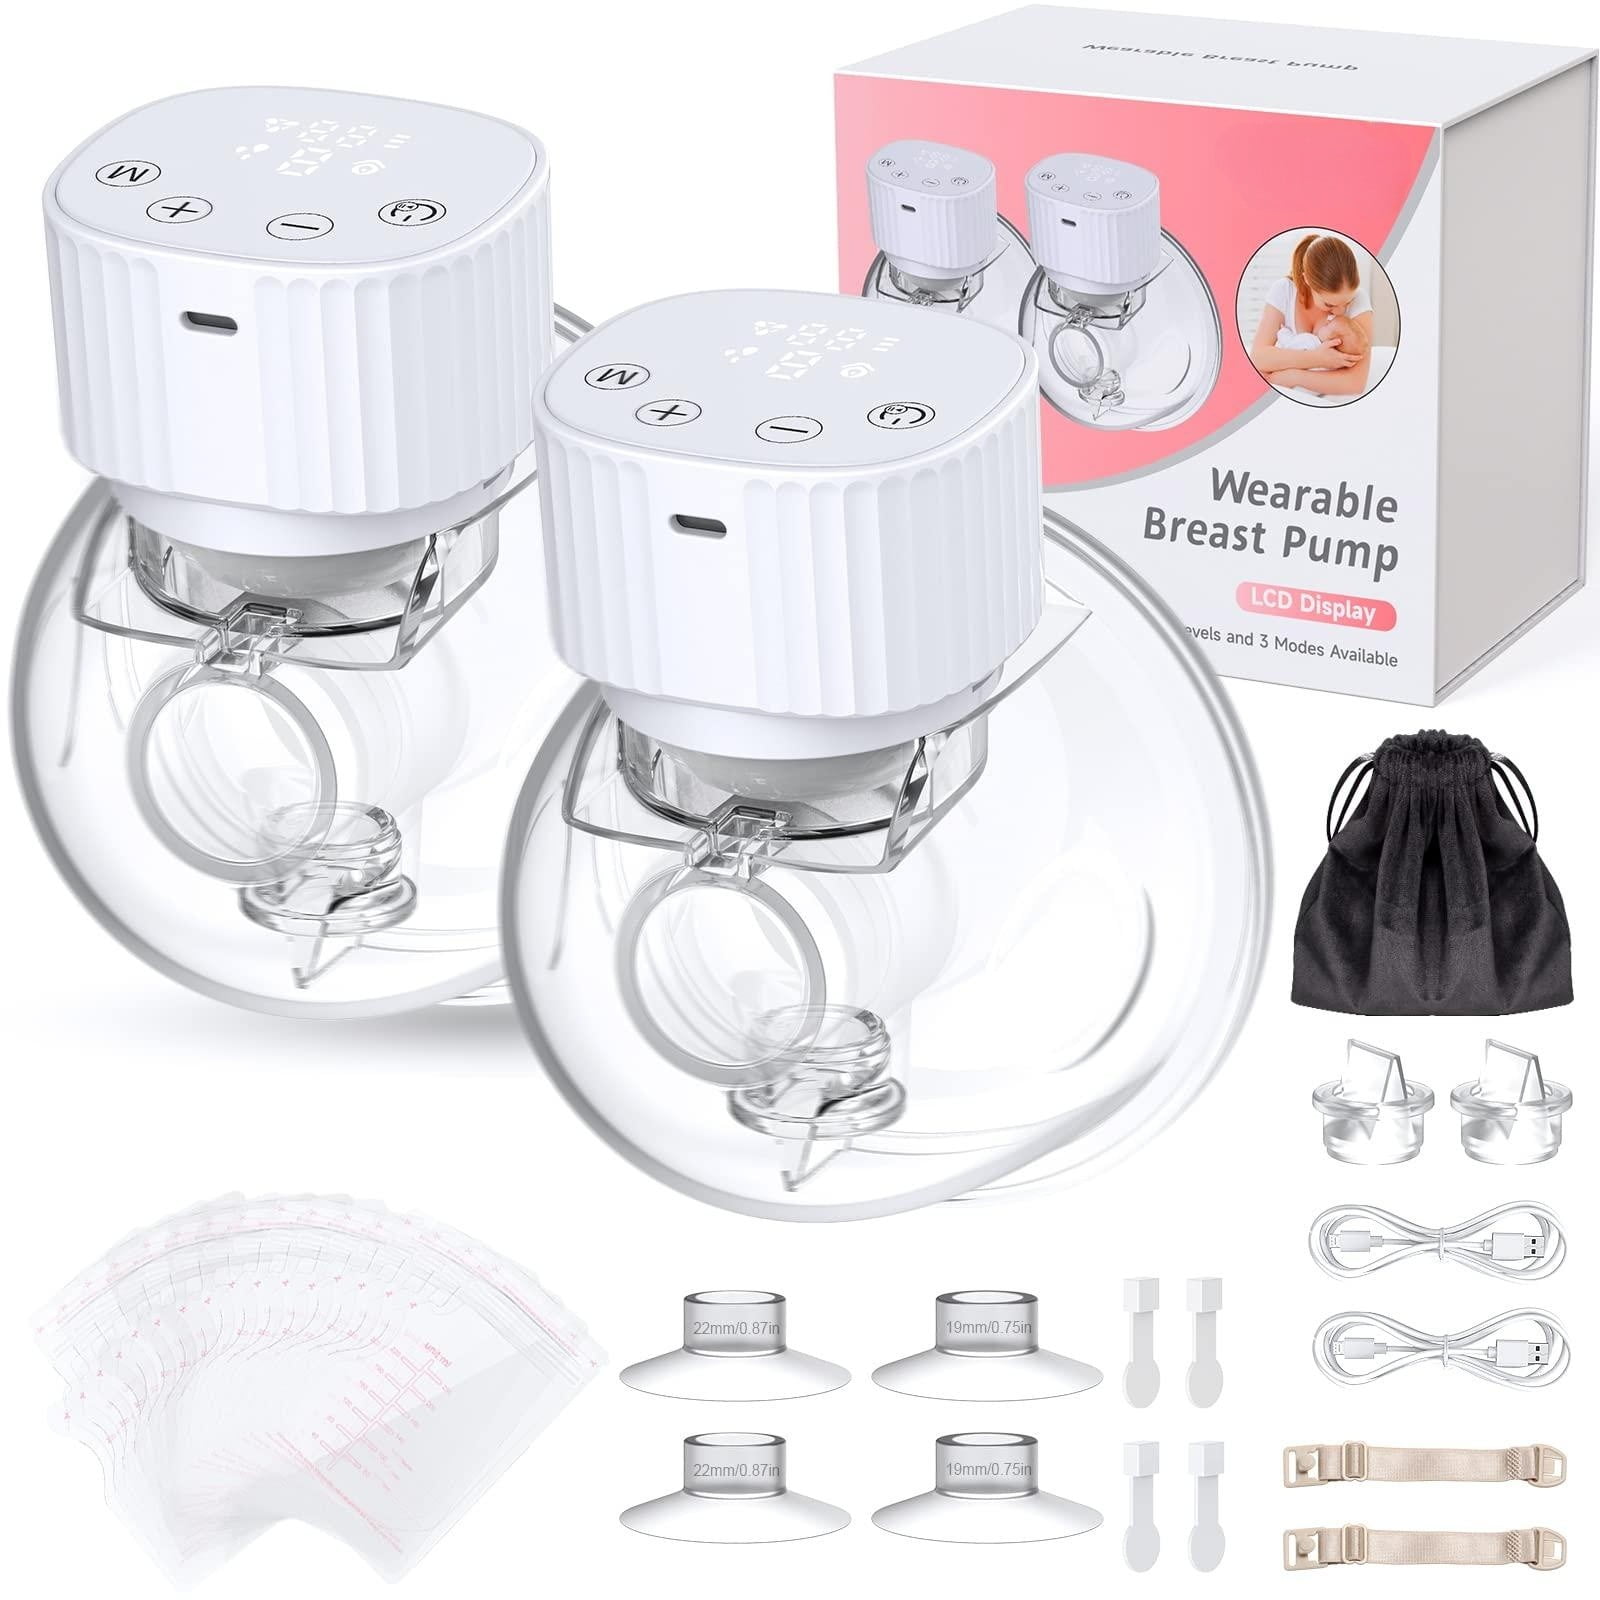 Sherry Wearable Breast Pump,Hands Free Breast Pump,Breast Pump,LED  Display,Low Noise &Painless Breastfeeding,3 Modes & 9 Levels,Electric  Breast